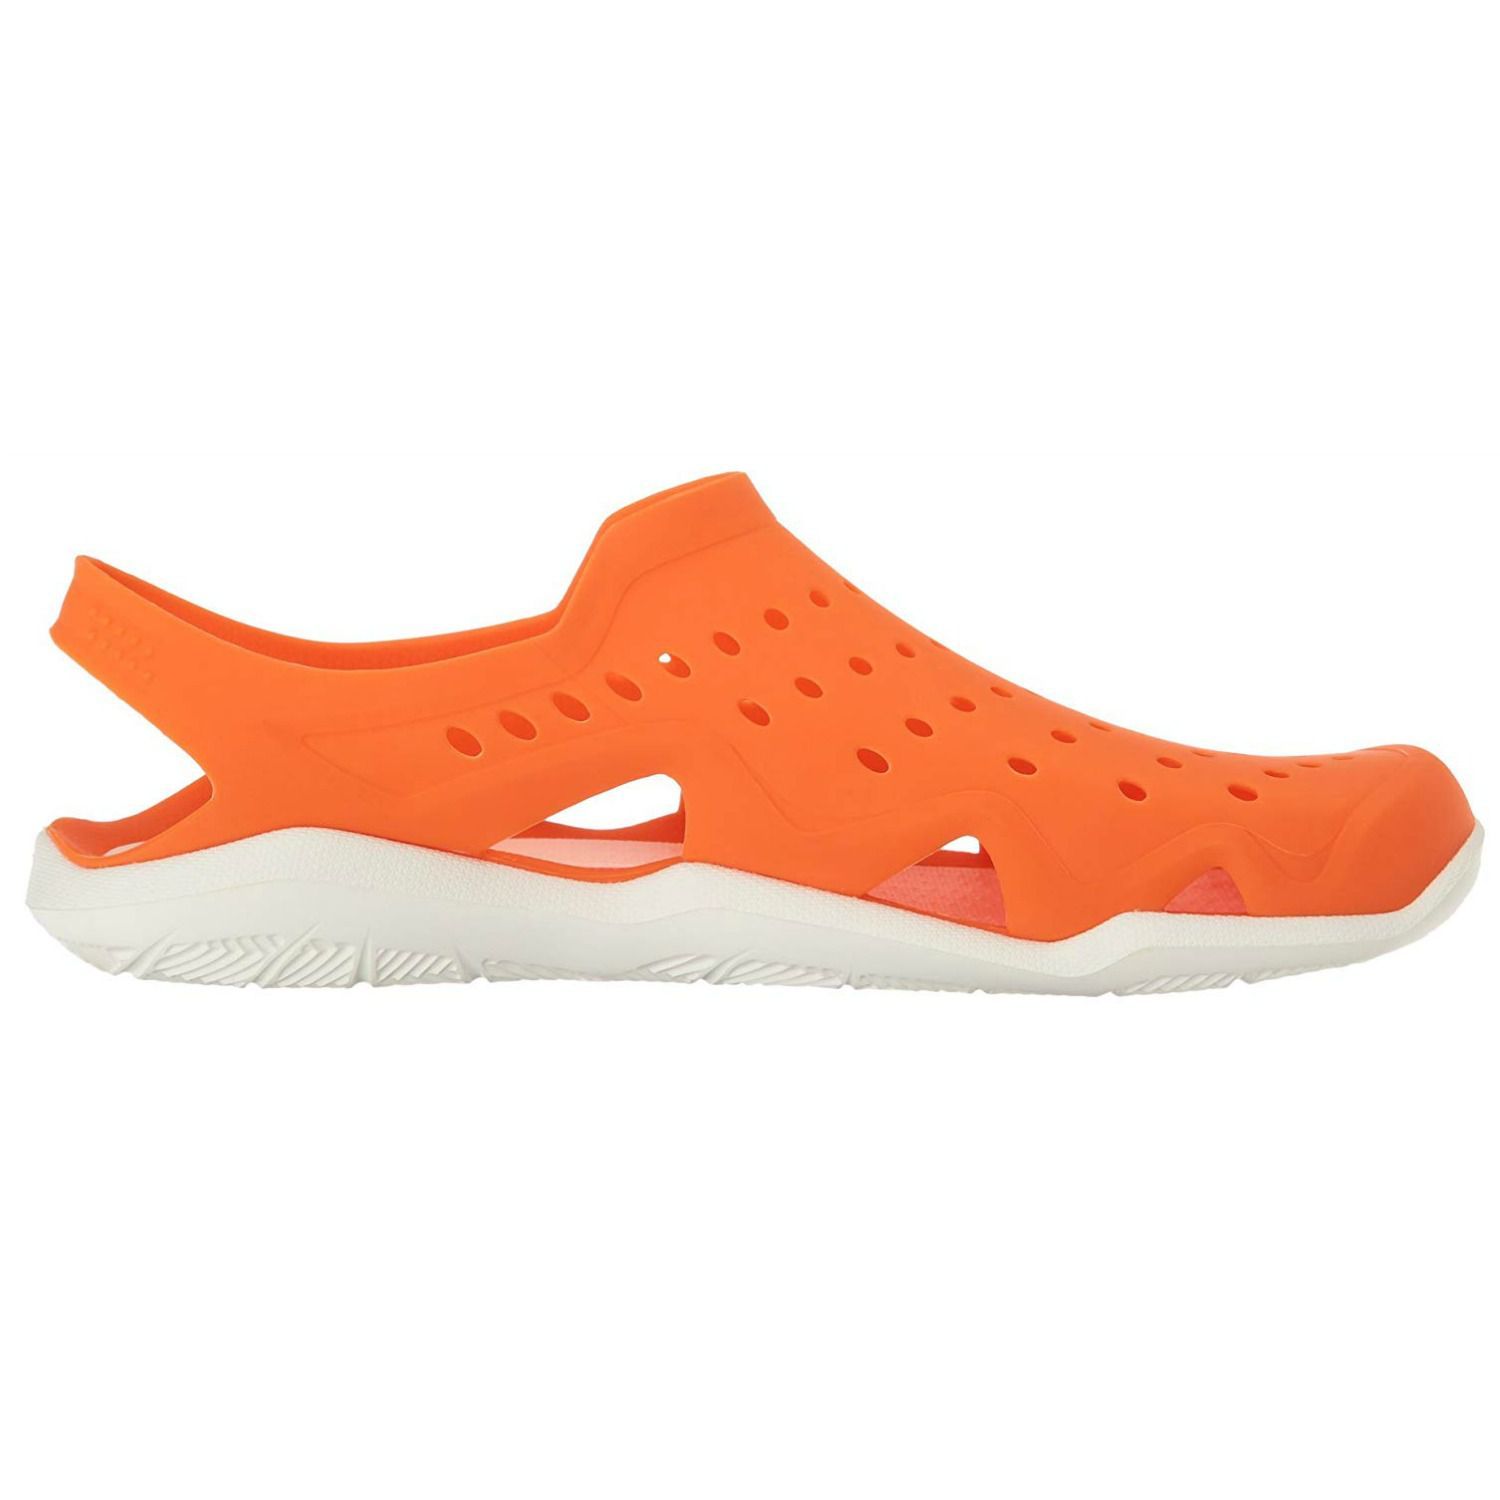 grippy water shoes